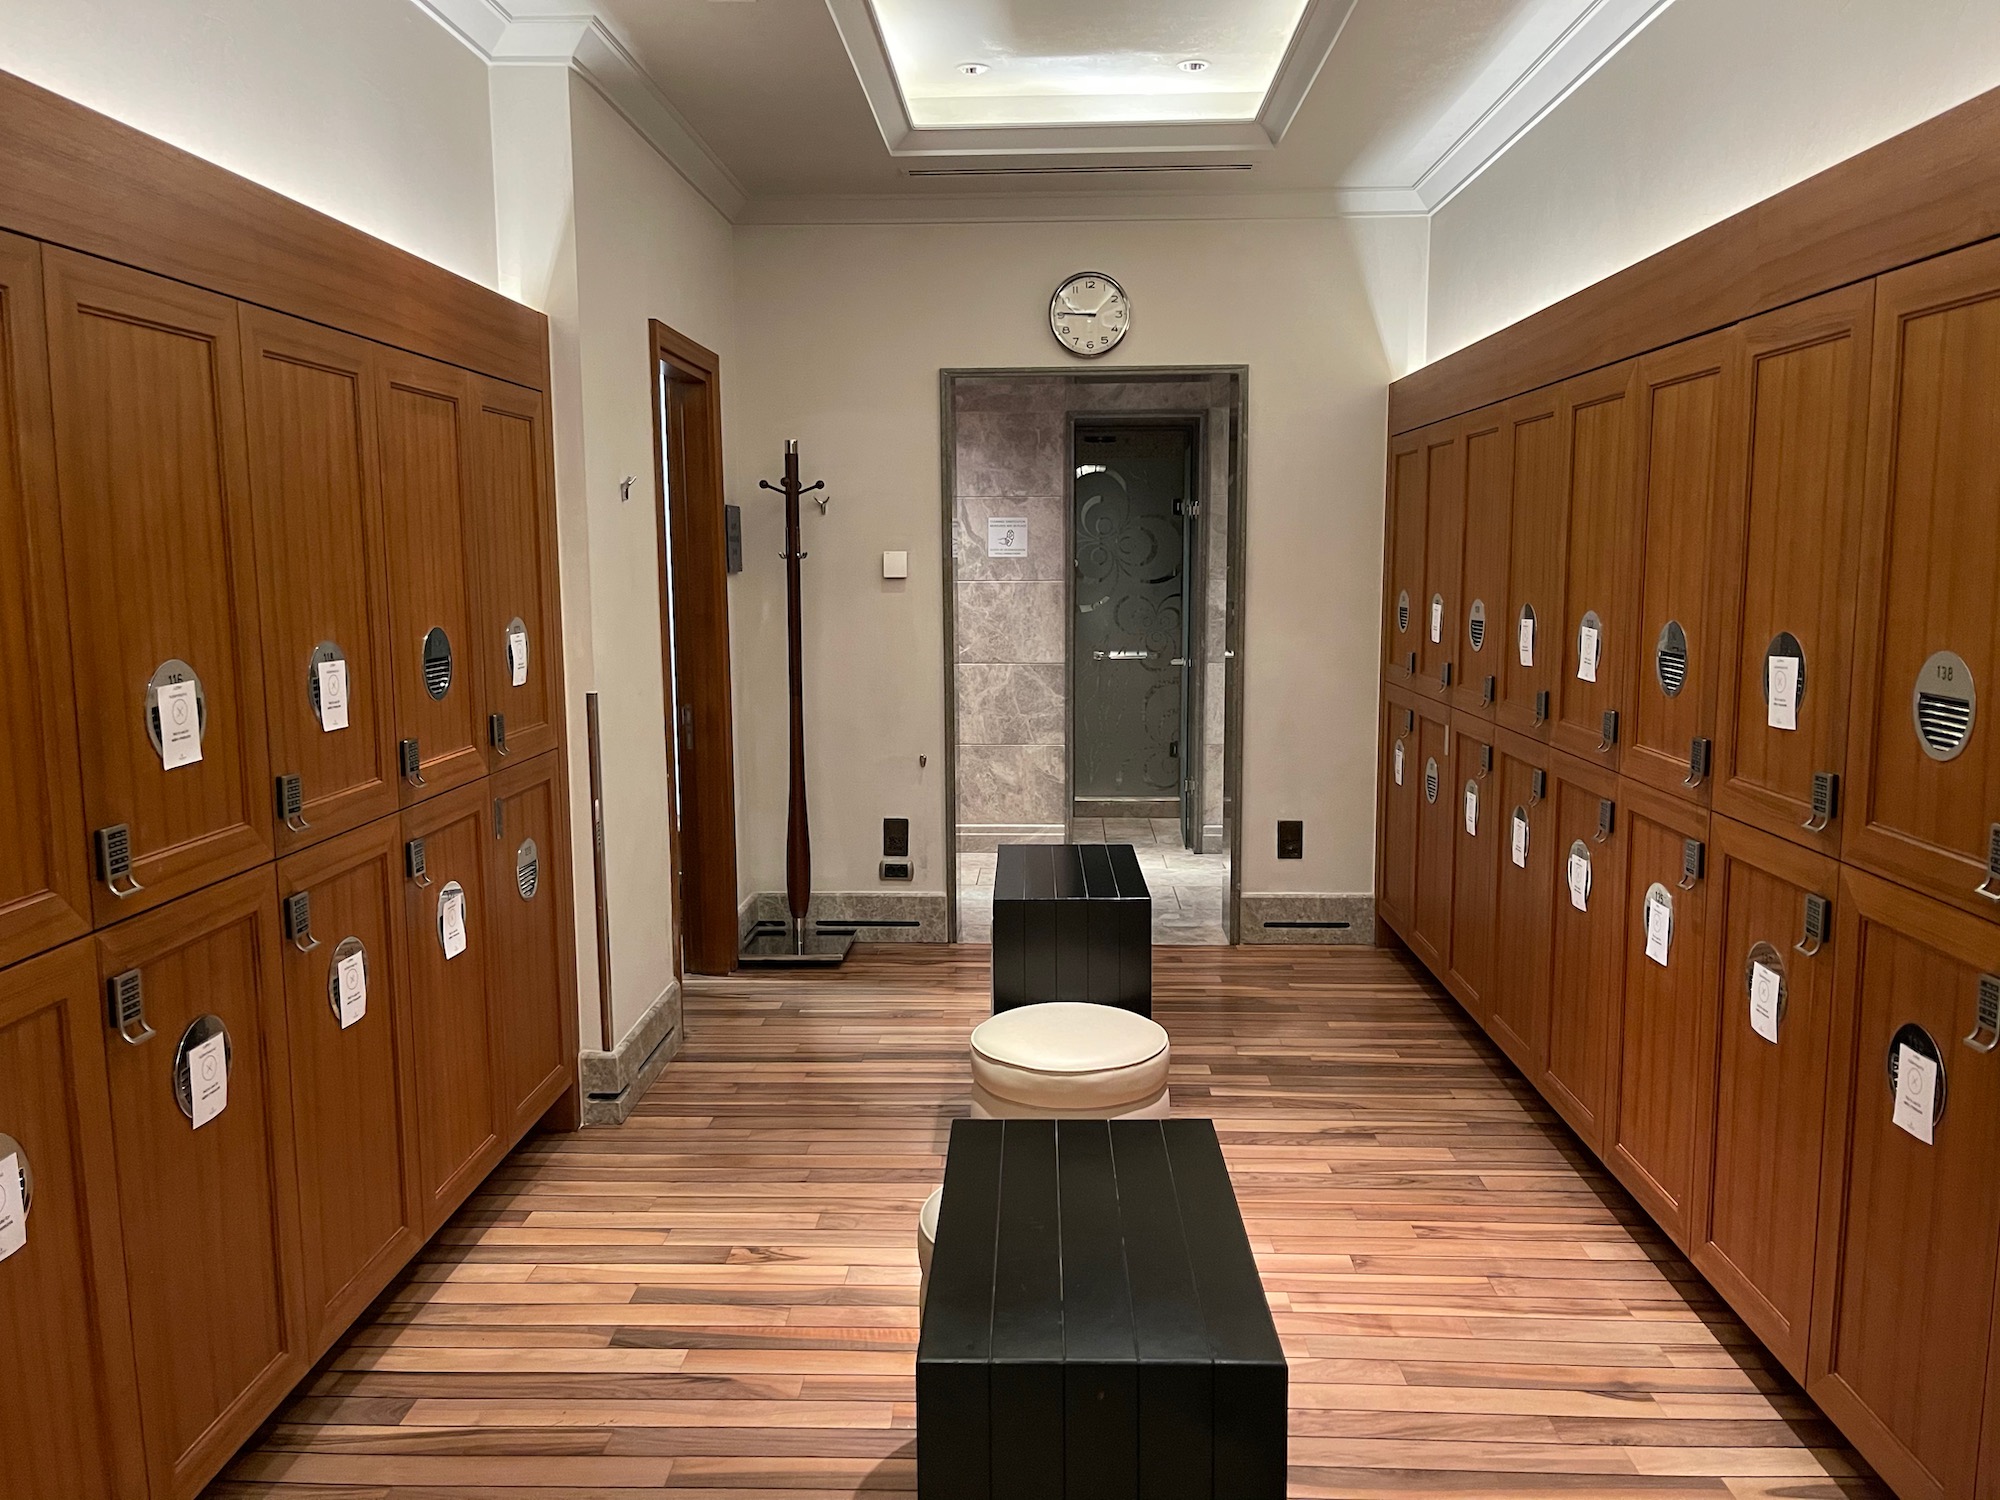 a hallway with lockers and toilet seats